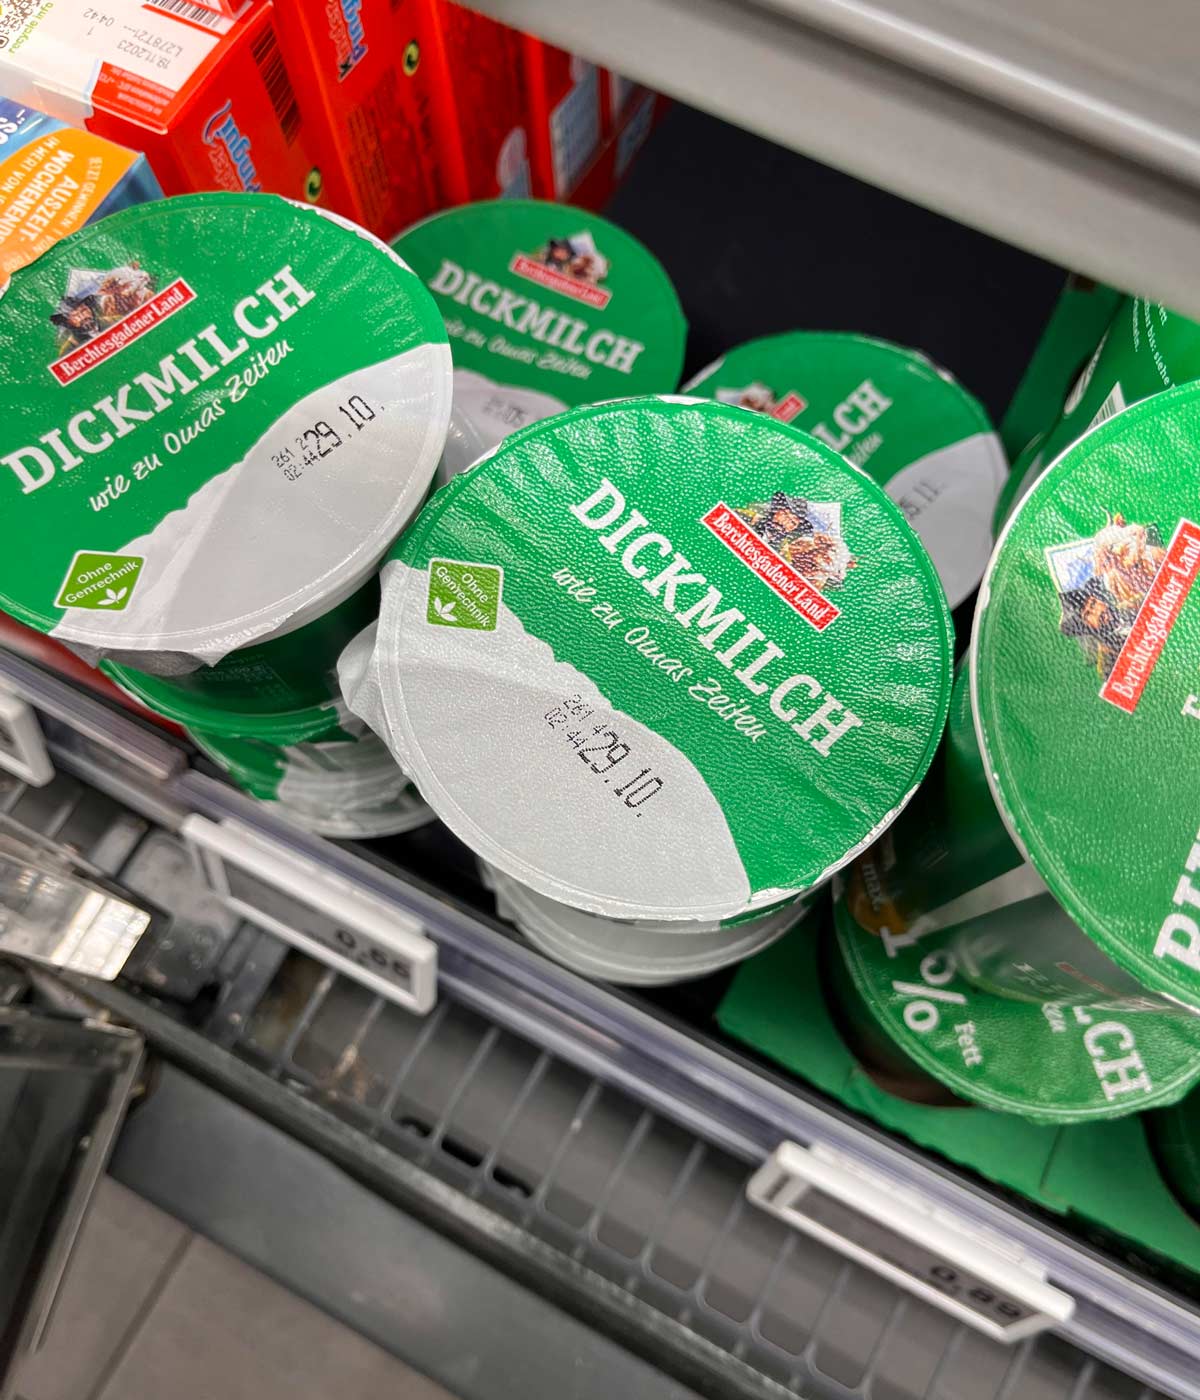 Every time I walk down the dairy aisle in Germany and see this, I laugh like I’m 12 again